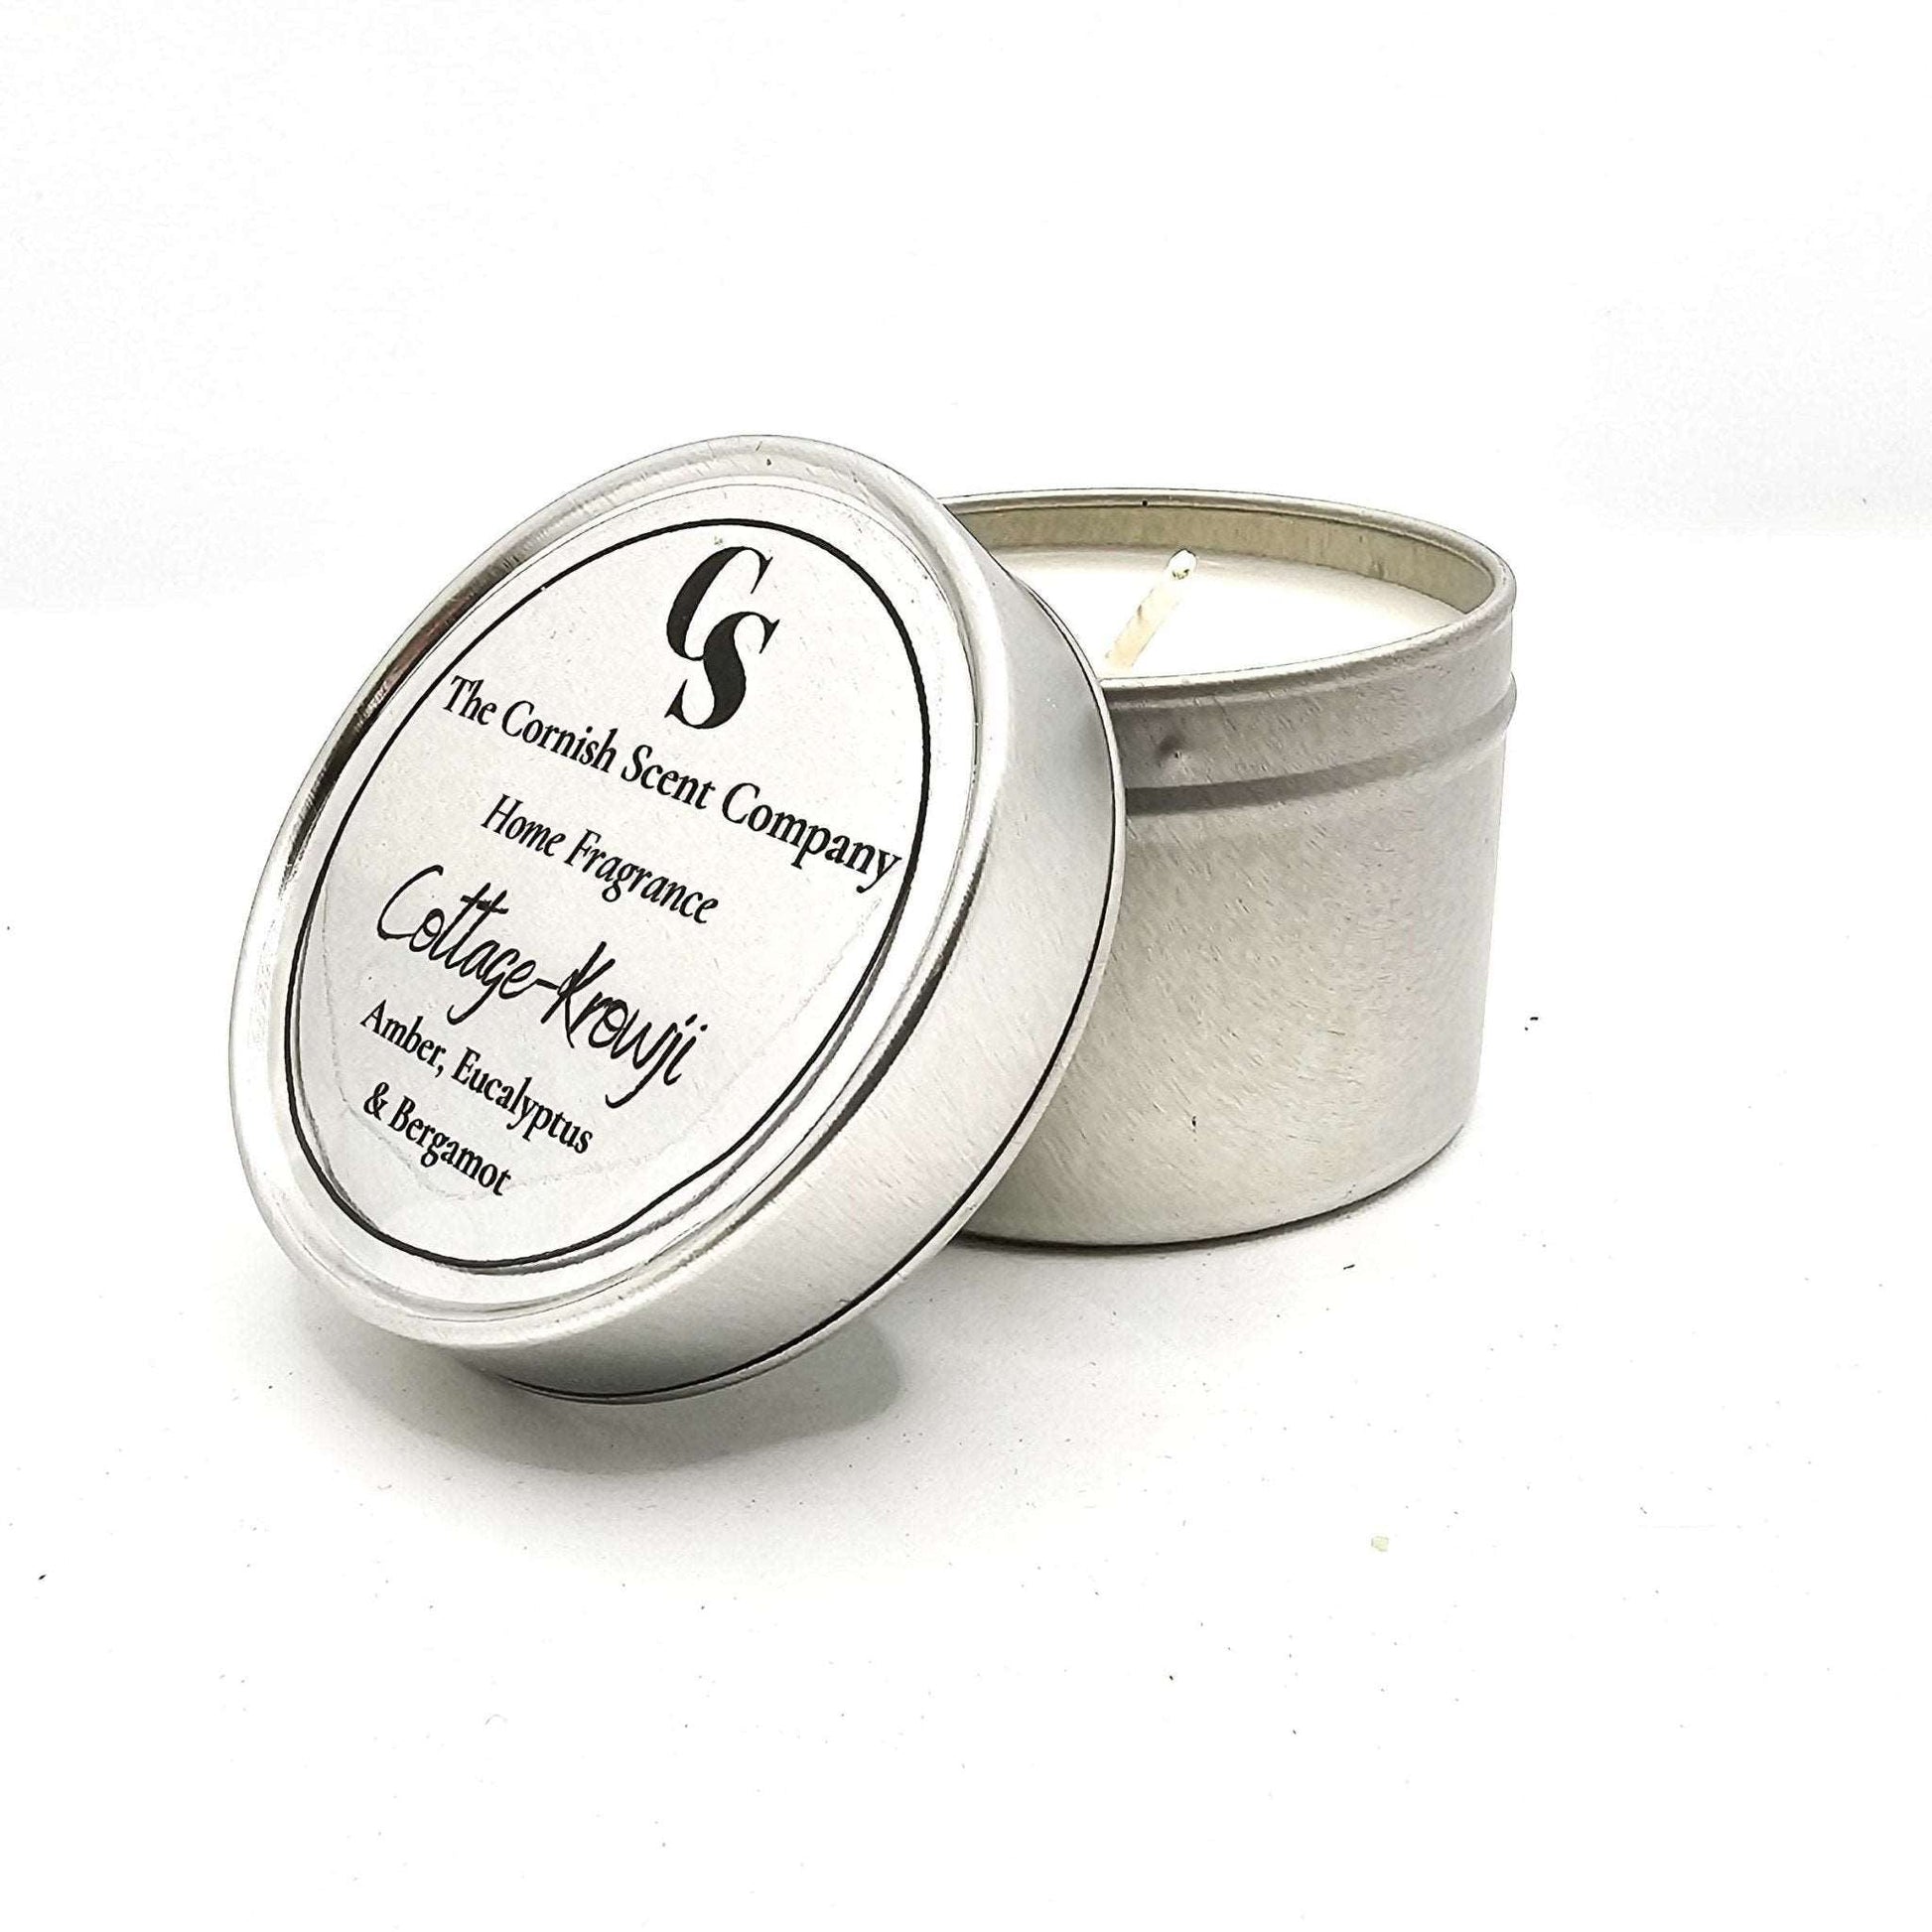 Single wick Cottage candle - The Cornish Scent Company